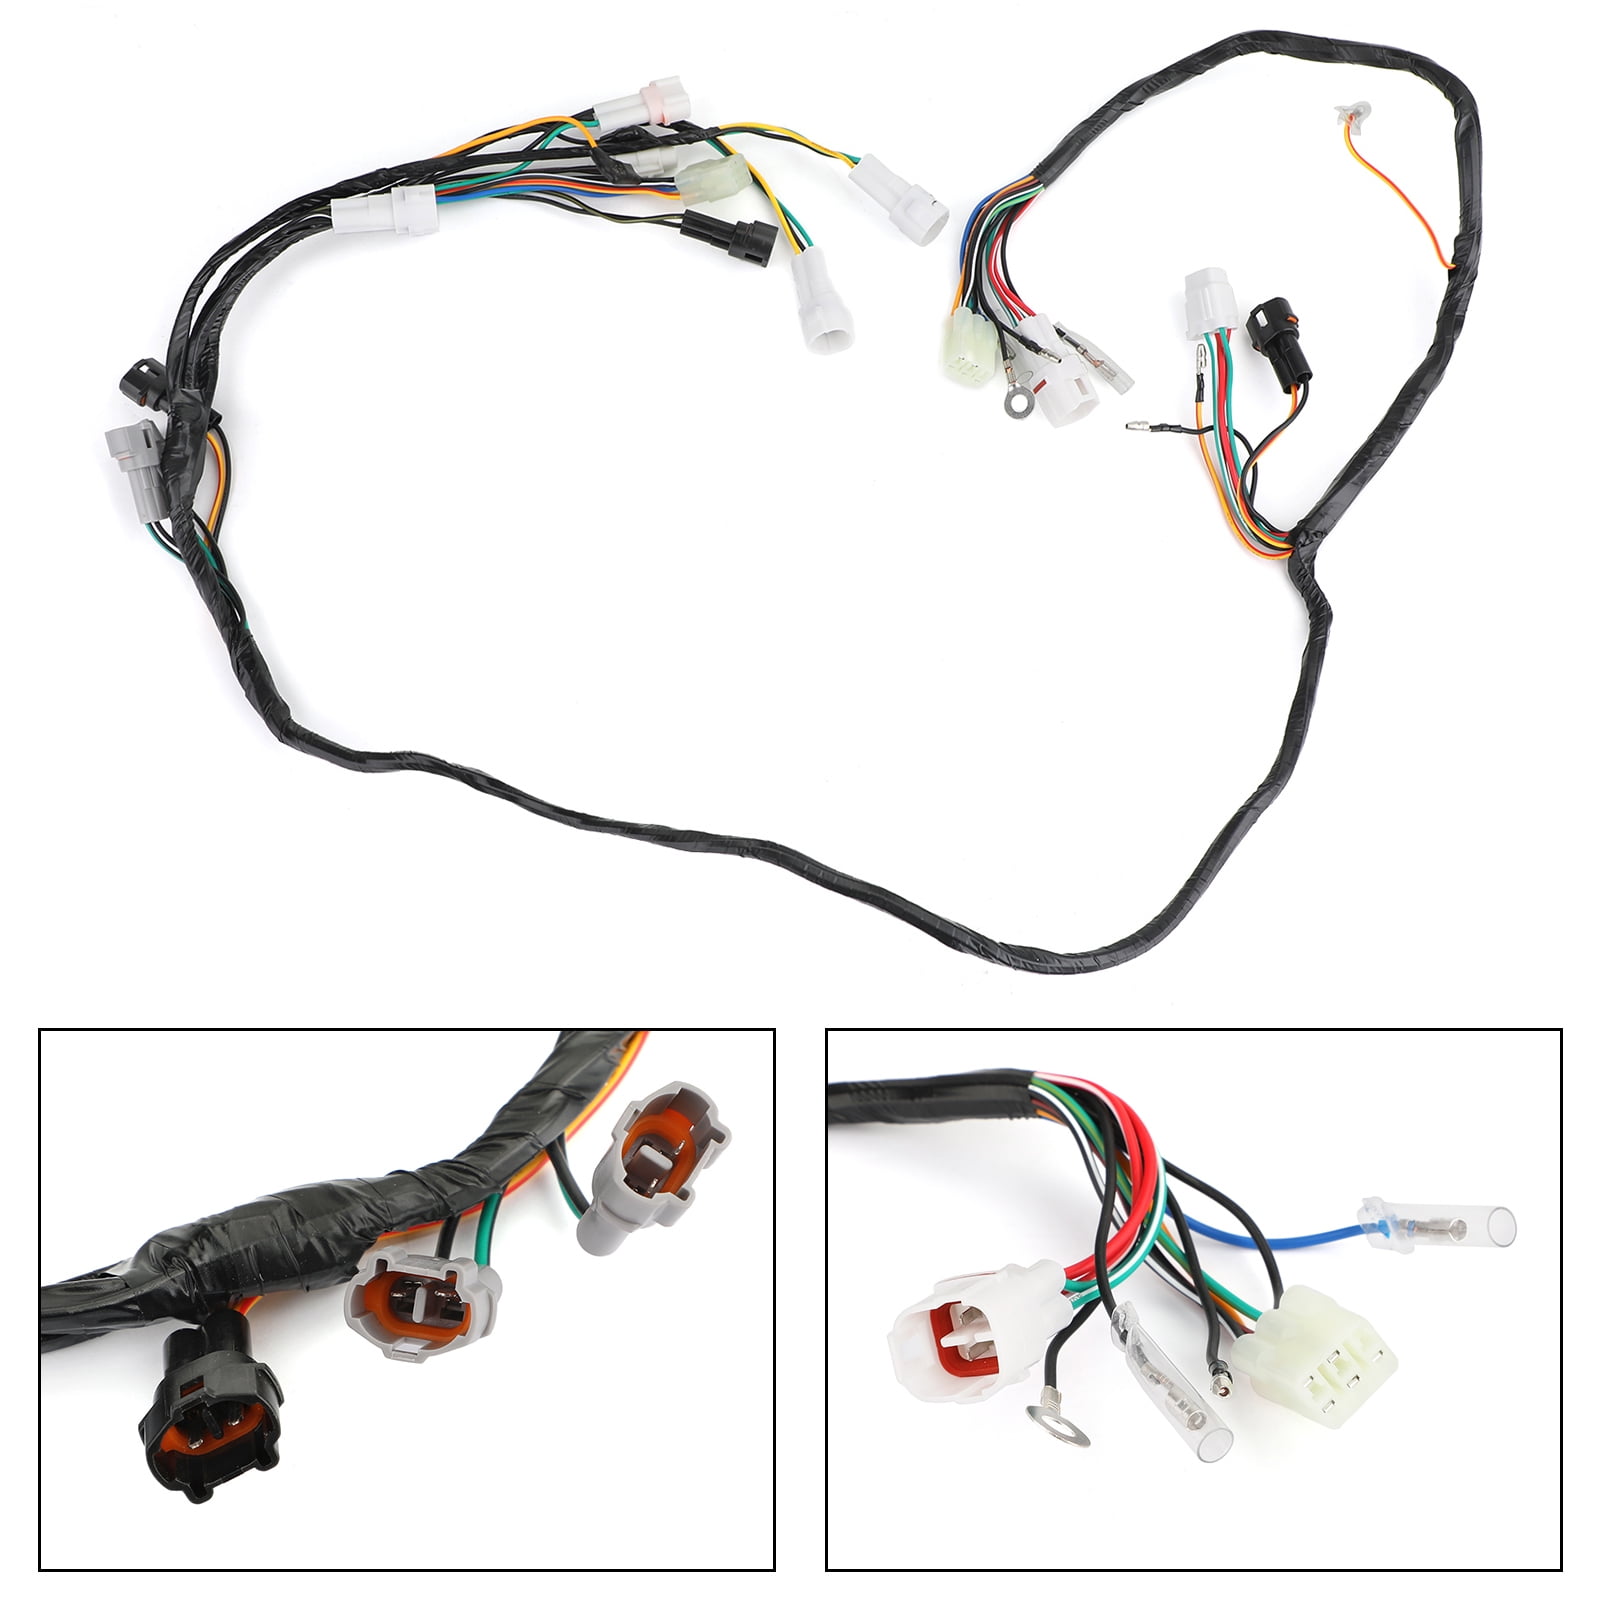 NEW Yamaha Banshee wiring harness 3GG-10 COMPLETE OEM REPLACEMENT Fits 2002-2006